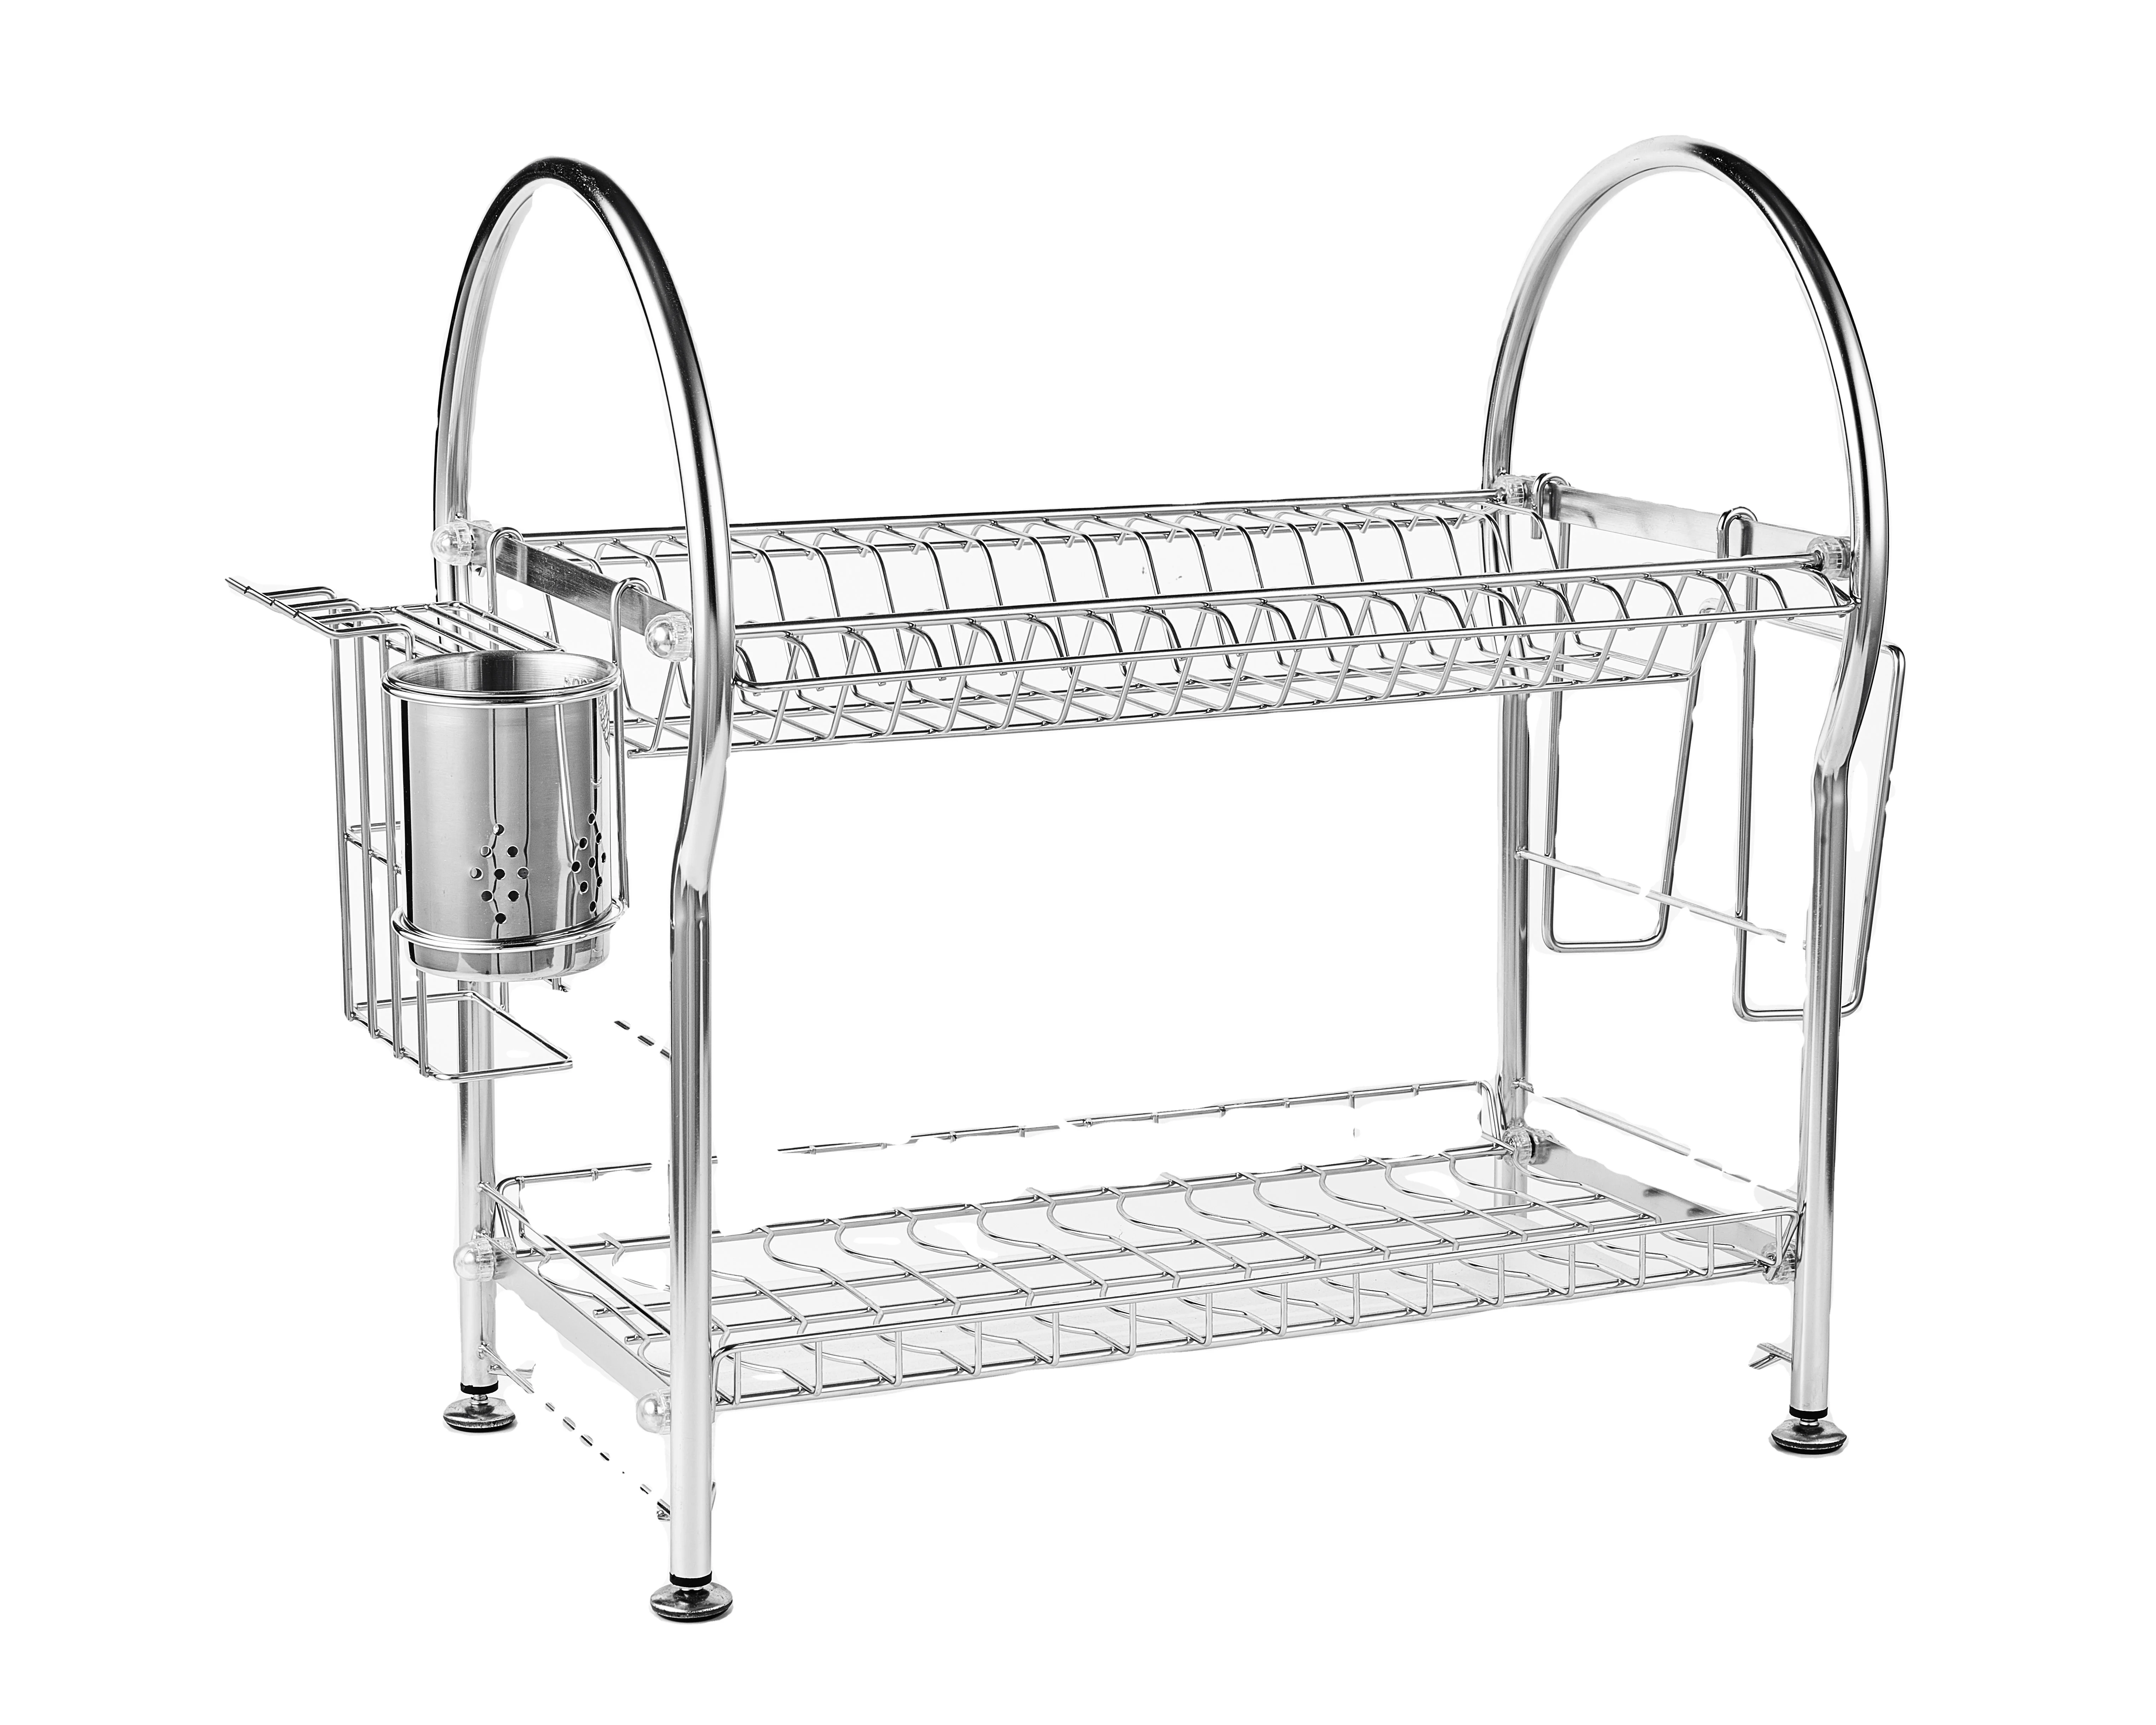 

2 tier metal kitchen stainless steel hanging dish drainer holder rack drying plate rack, Silver